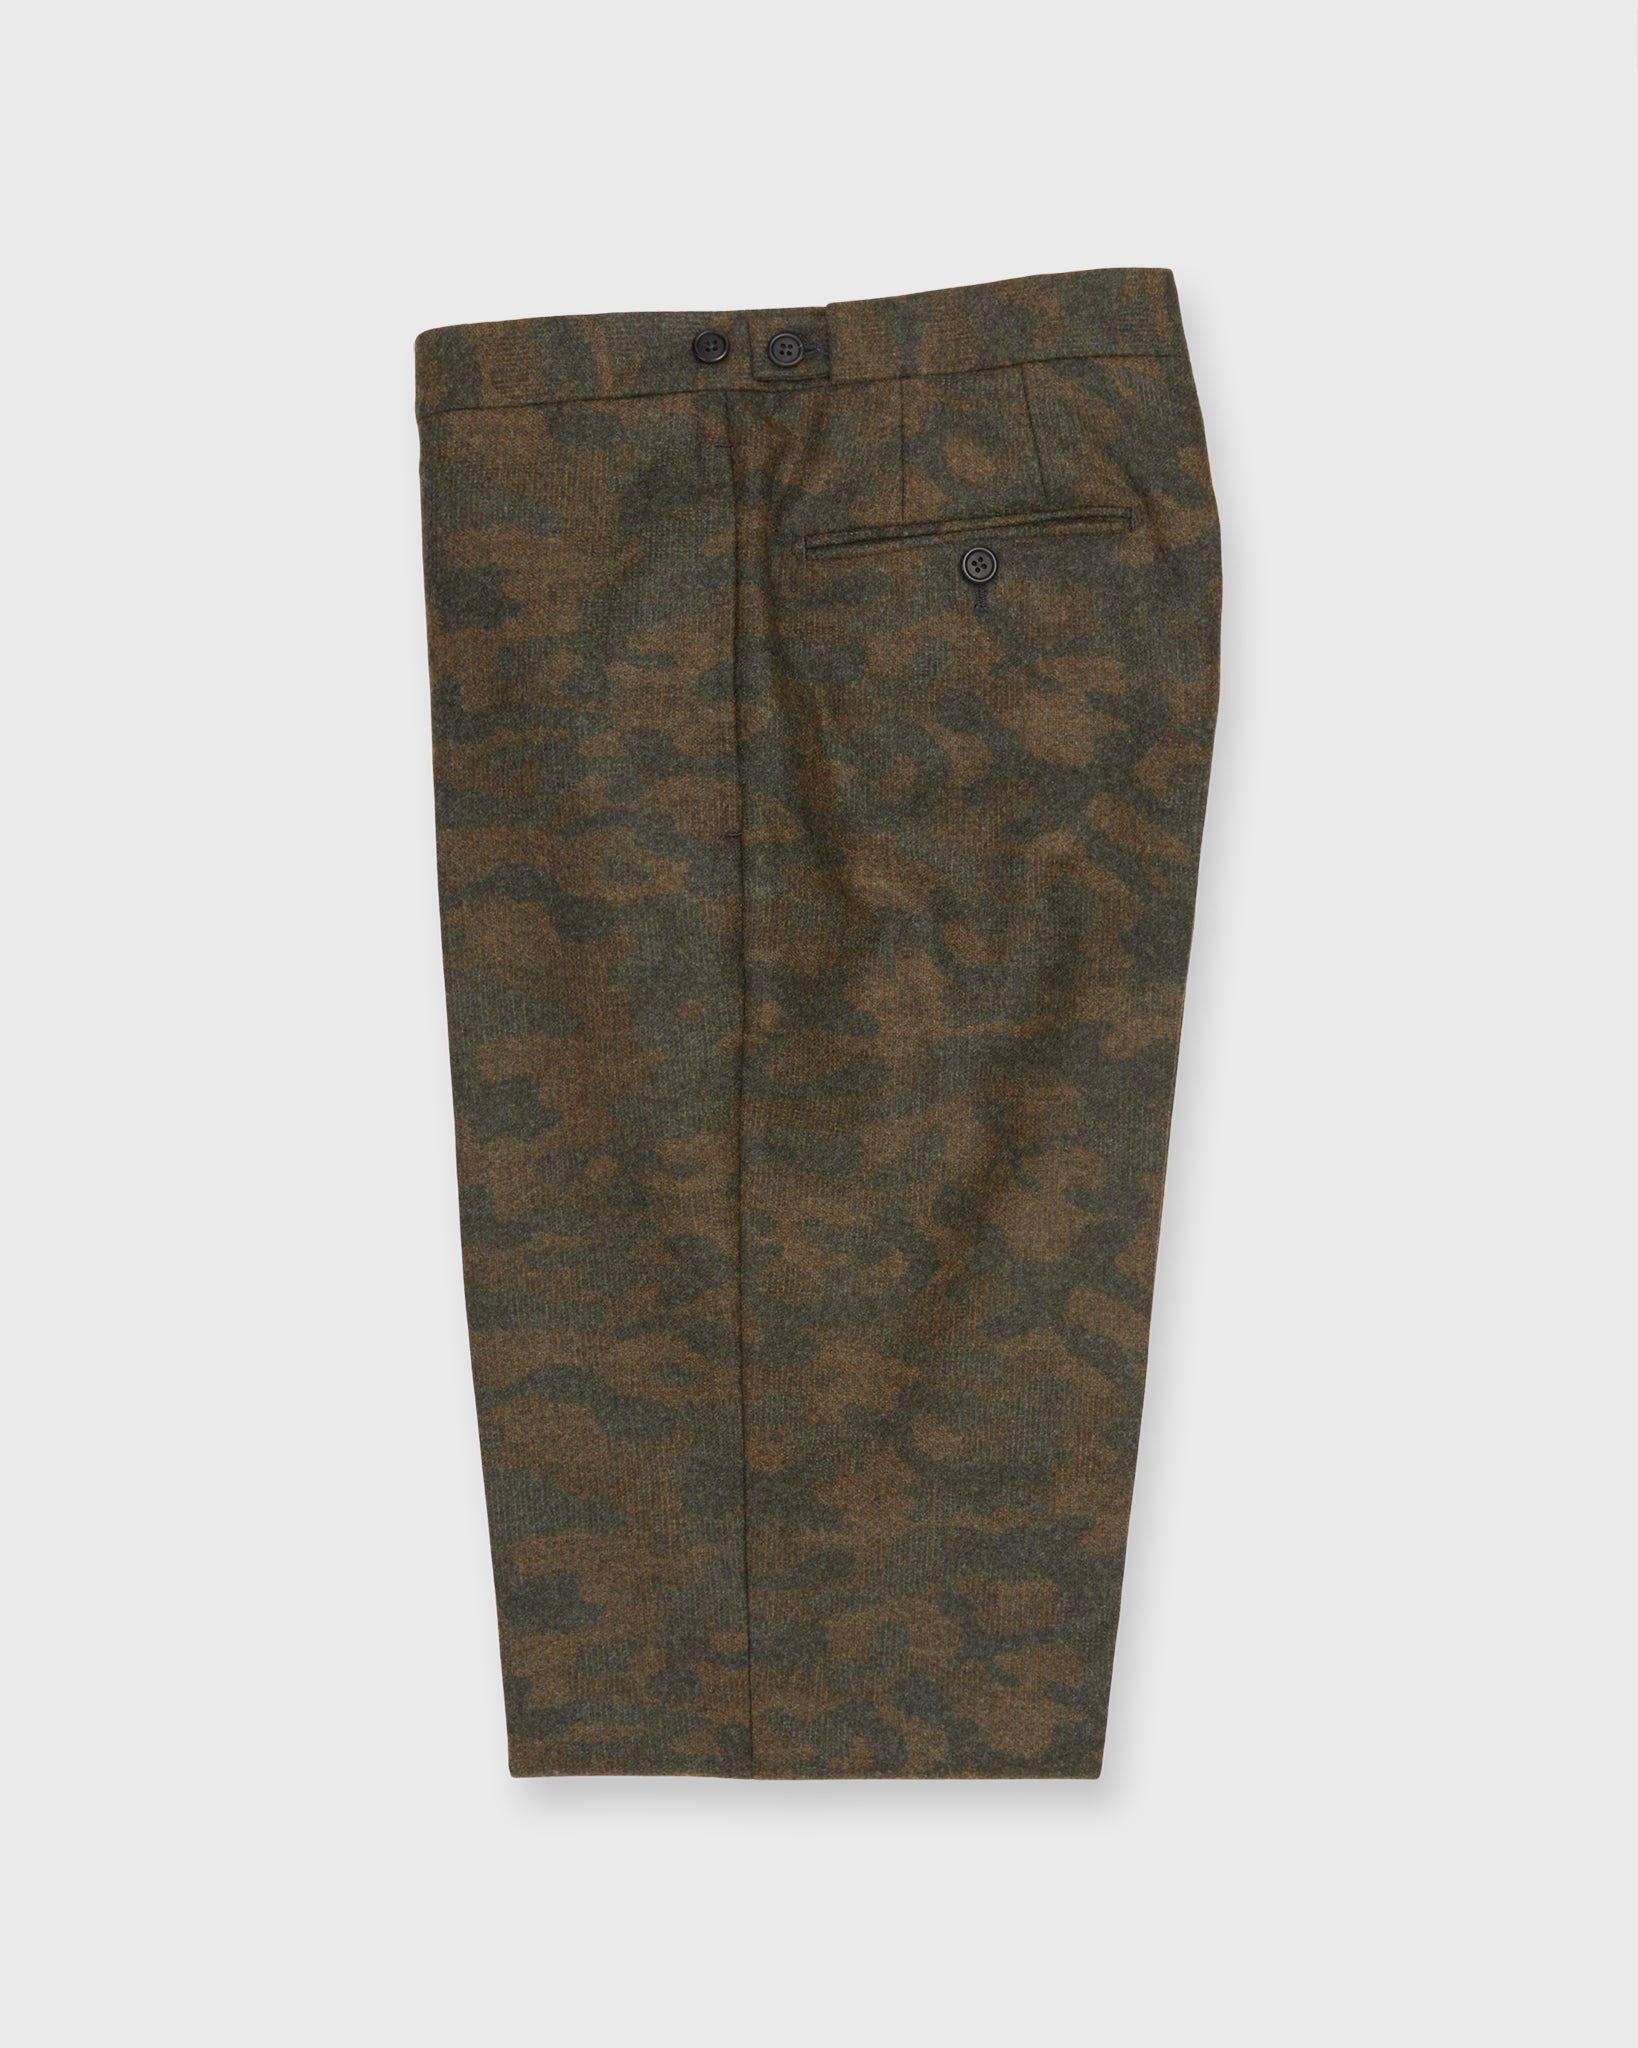 Side-Tab Dress Trouser in Brown/Olive Camo Flannel